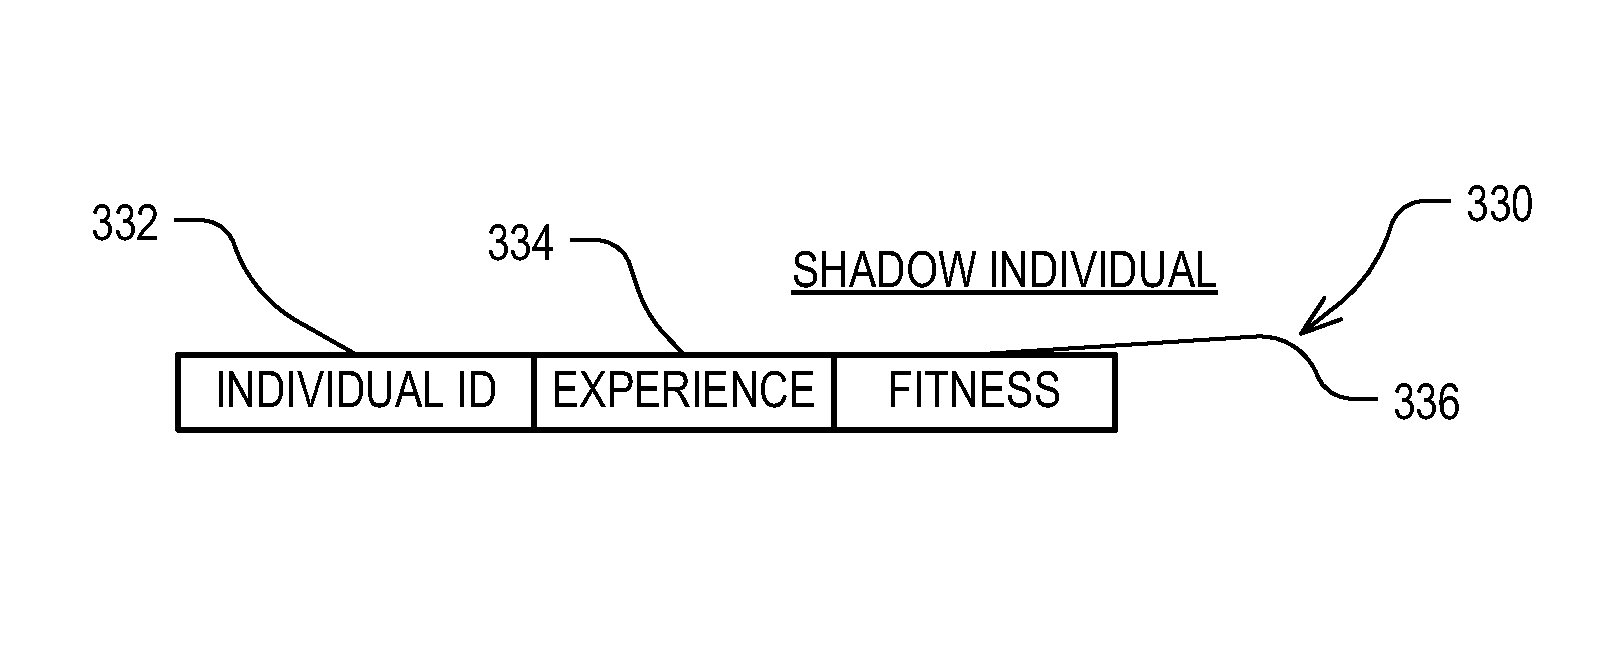 Data mining technique with shadow individuals